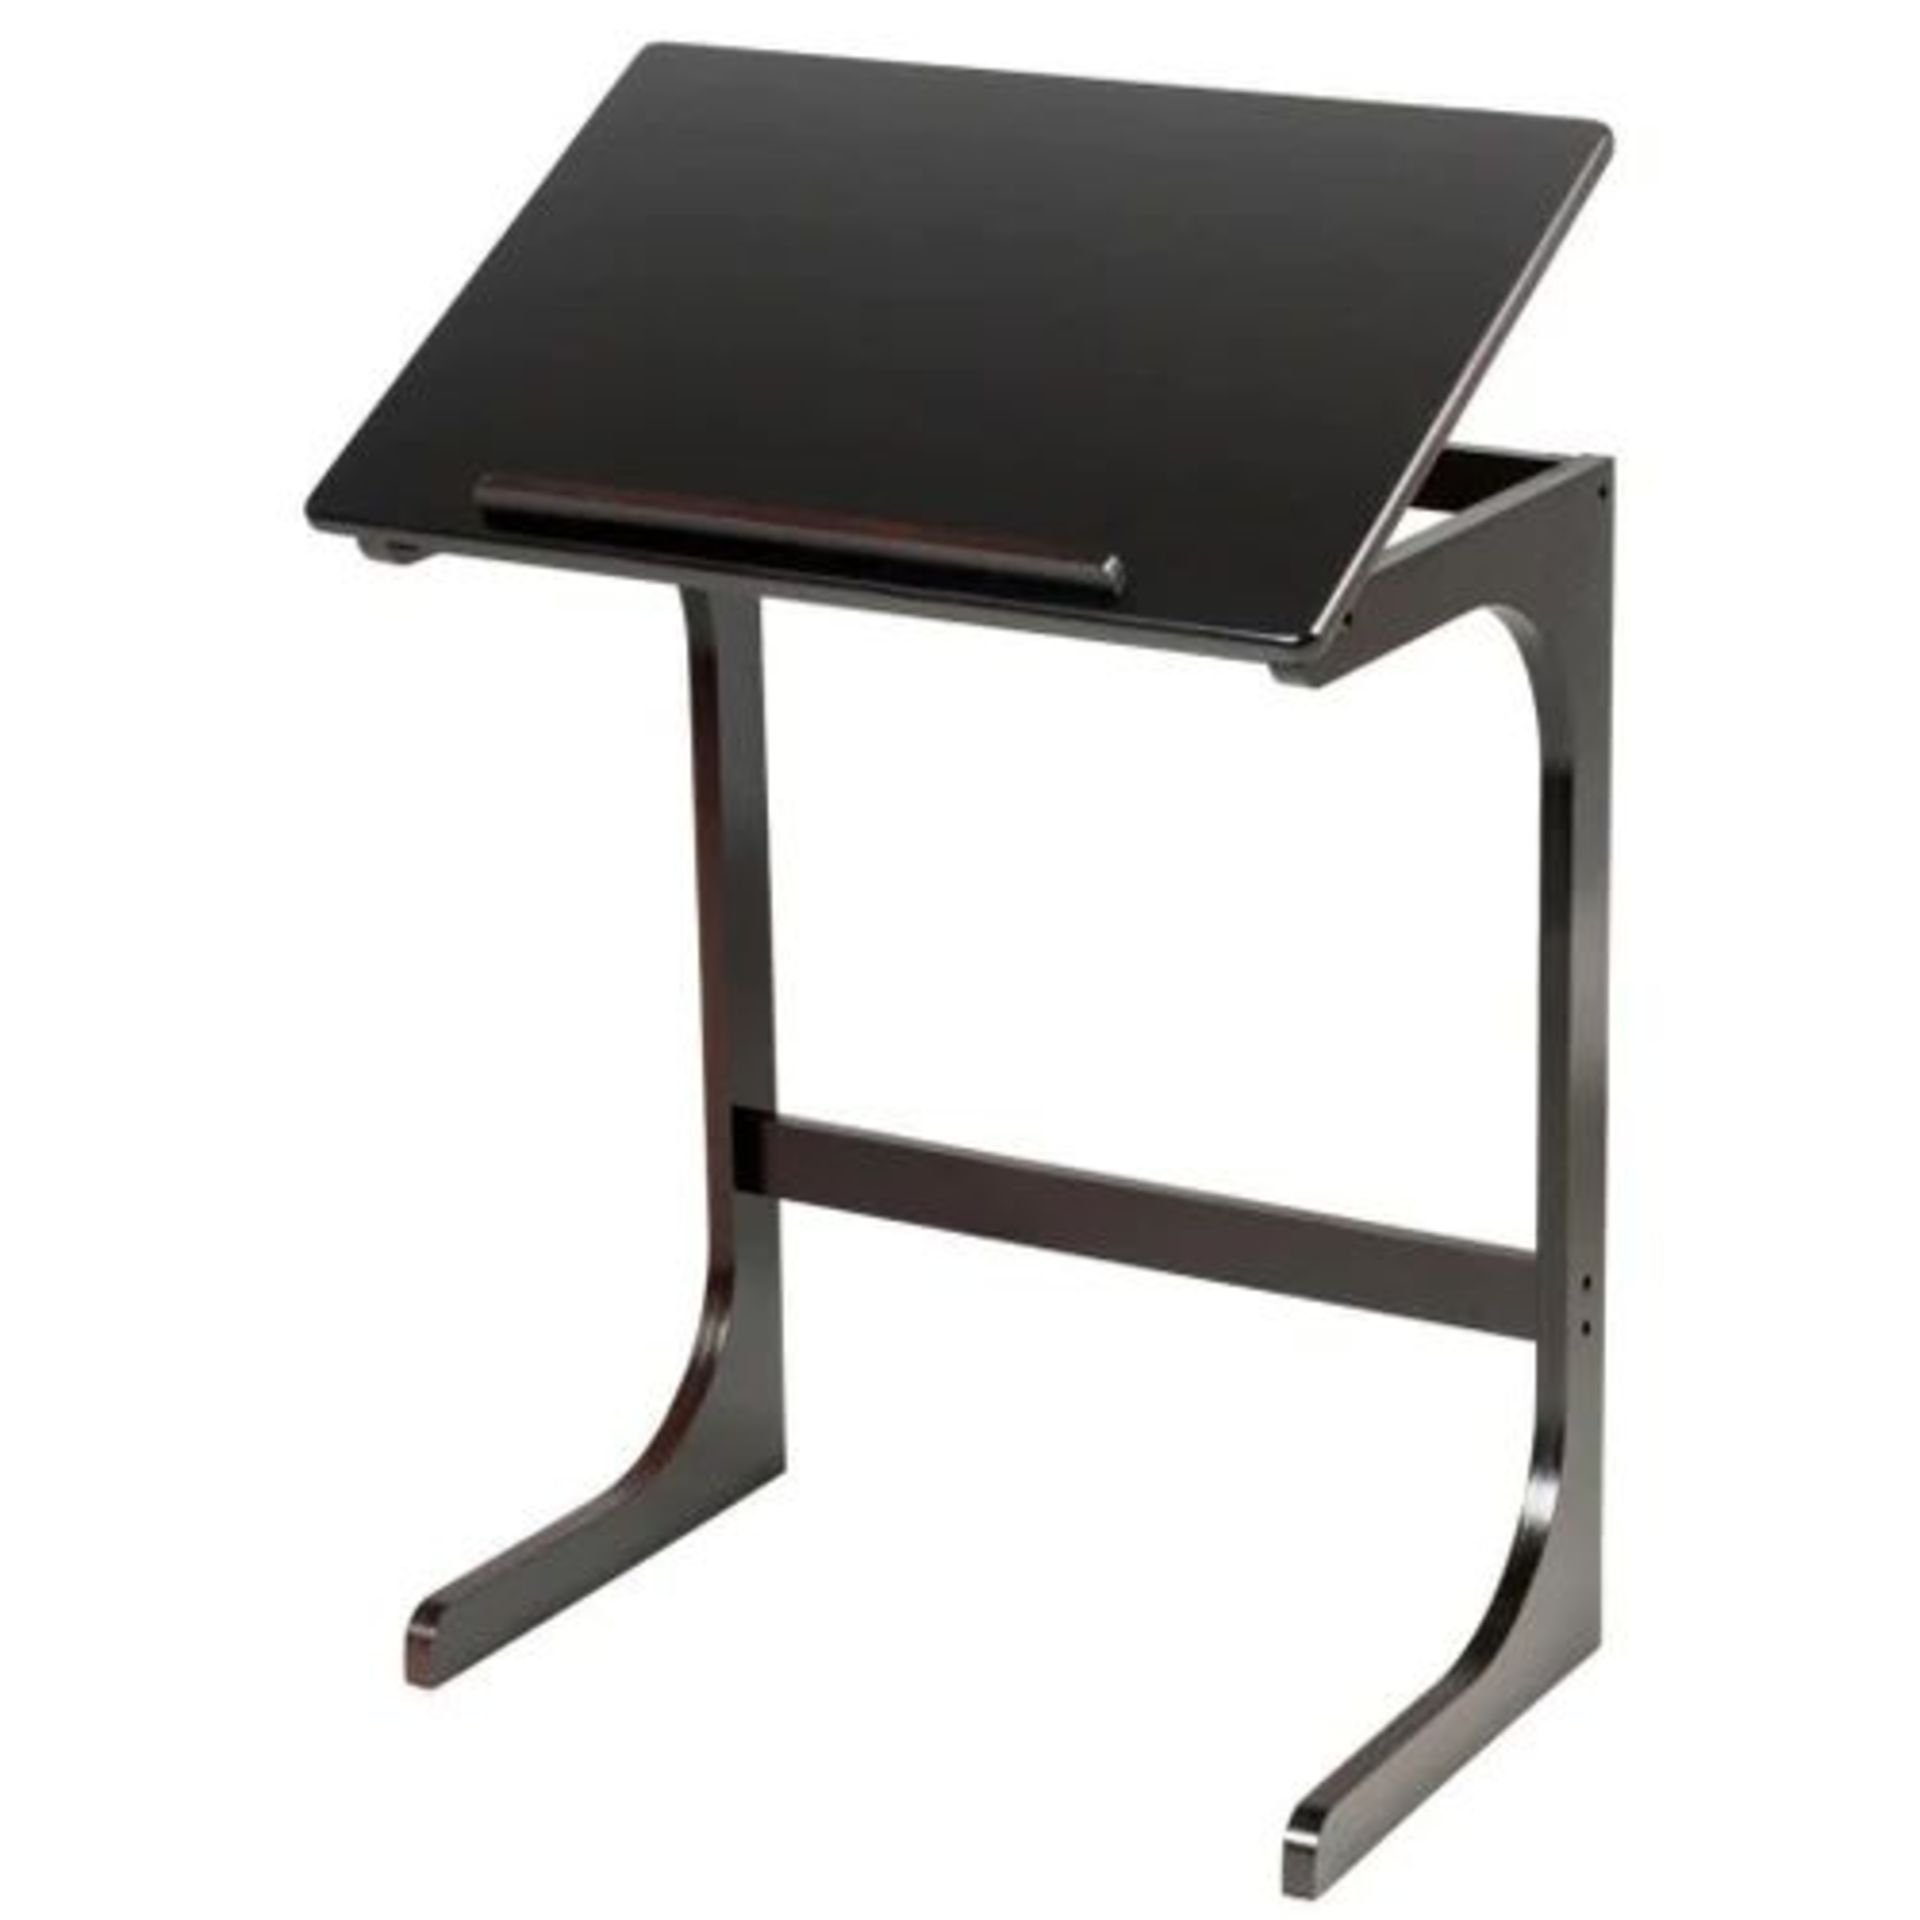 Adjustable C-Shape Couch End Table wth Tilting Top. - ER53. This is the multifunctional end table